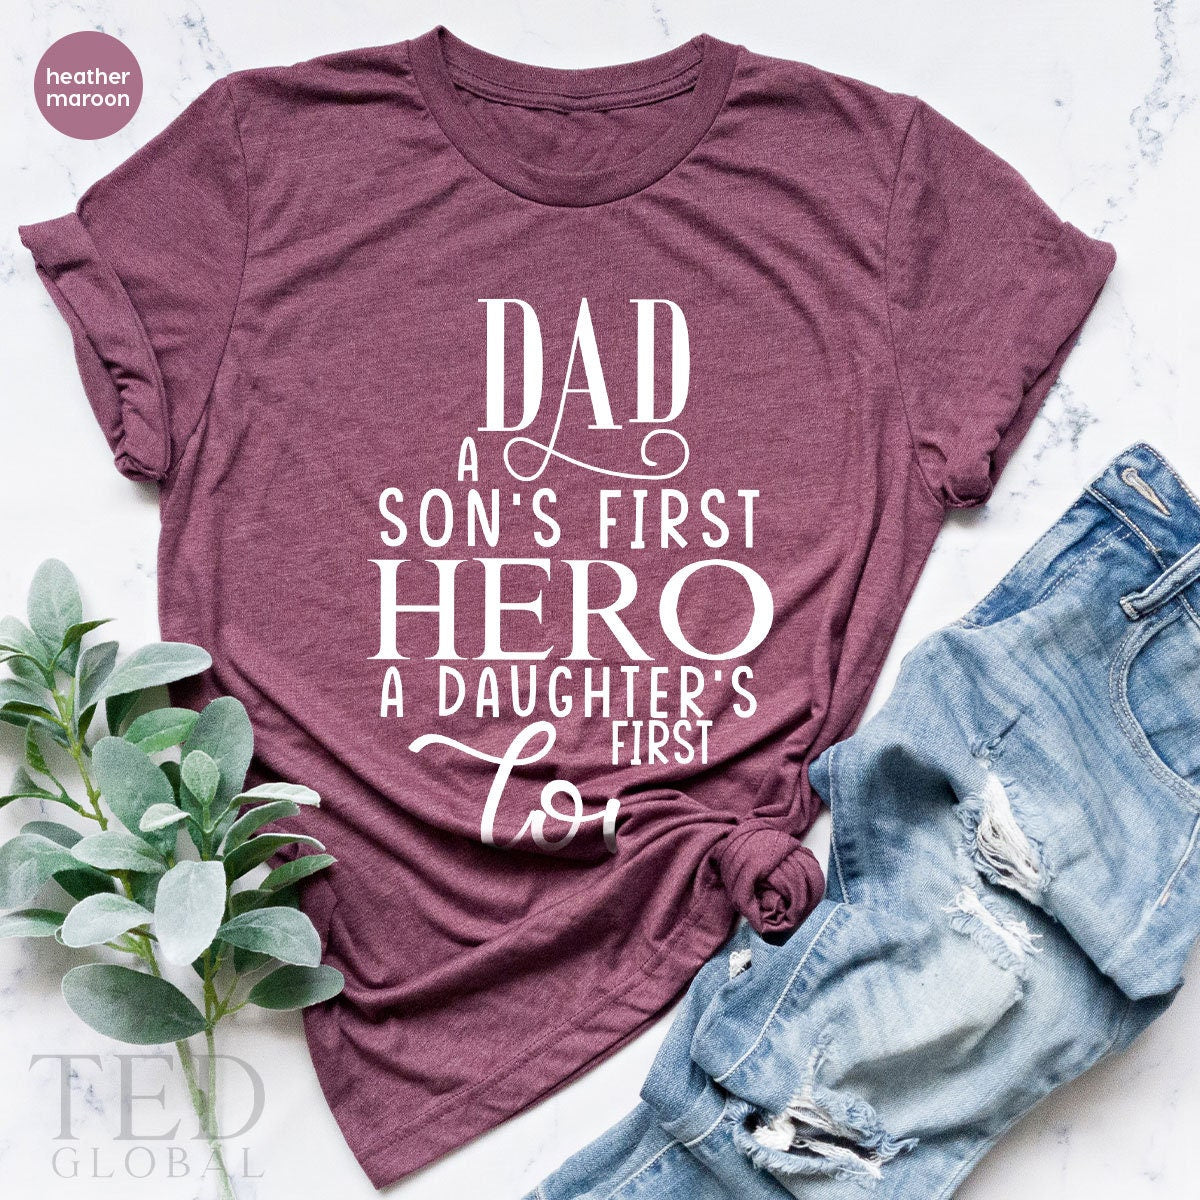 Dad Shirt, Sons First Hero Shirt, Fathers Day Shirt, Best Dad Shirt, Gifts For Dad From Daughter, Dad Birthday Gift, Girl Dad Shirt - Fastdeliverytees.com